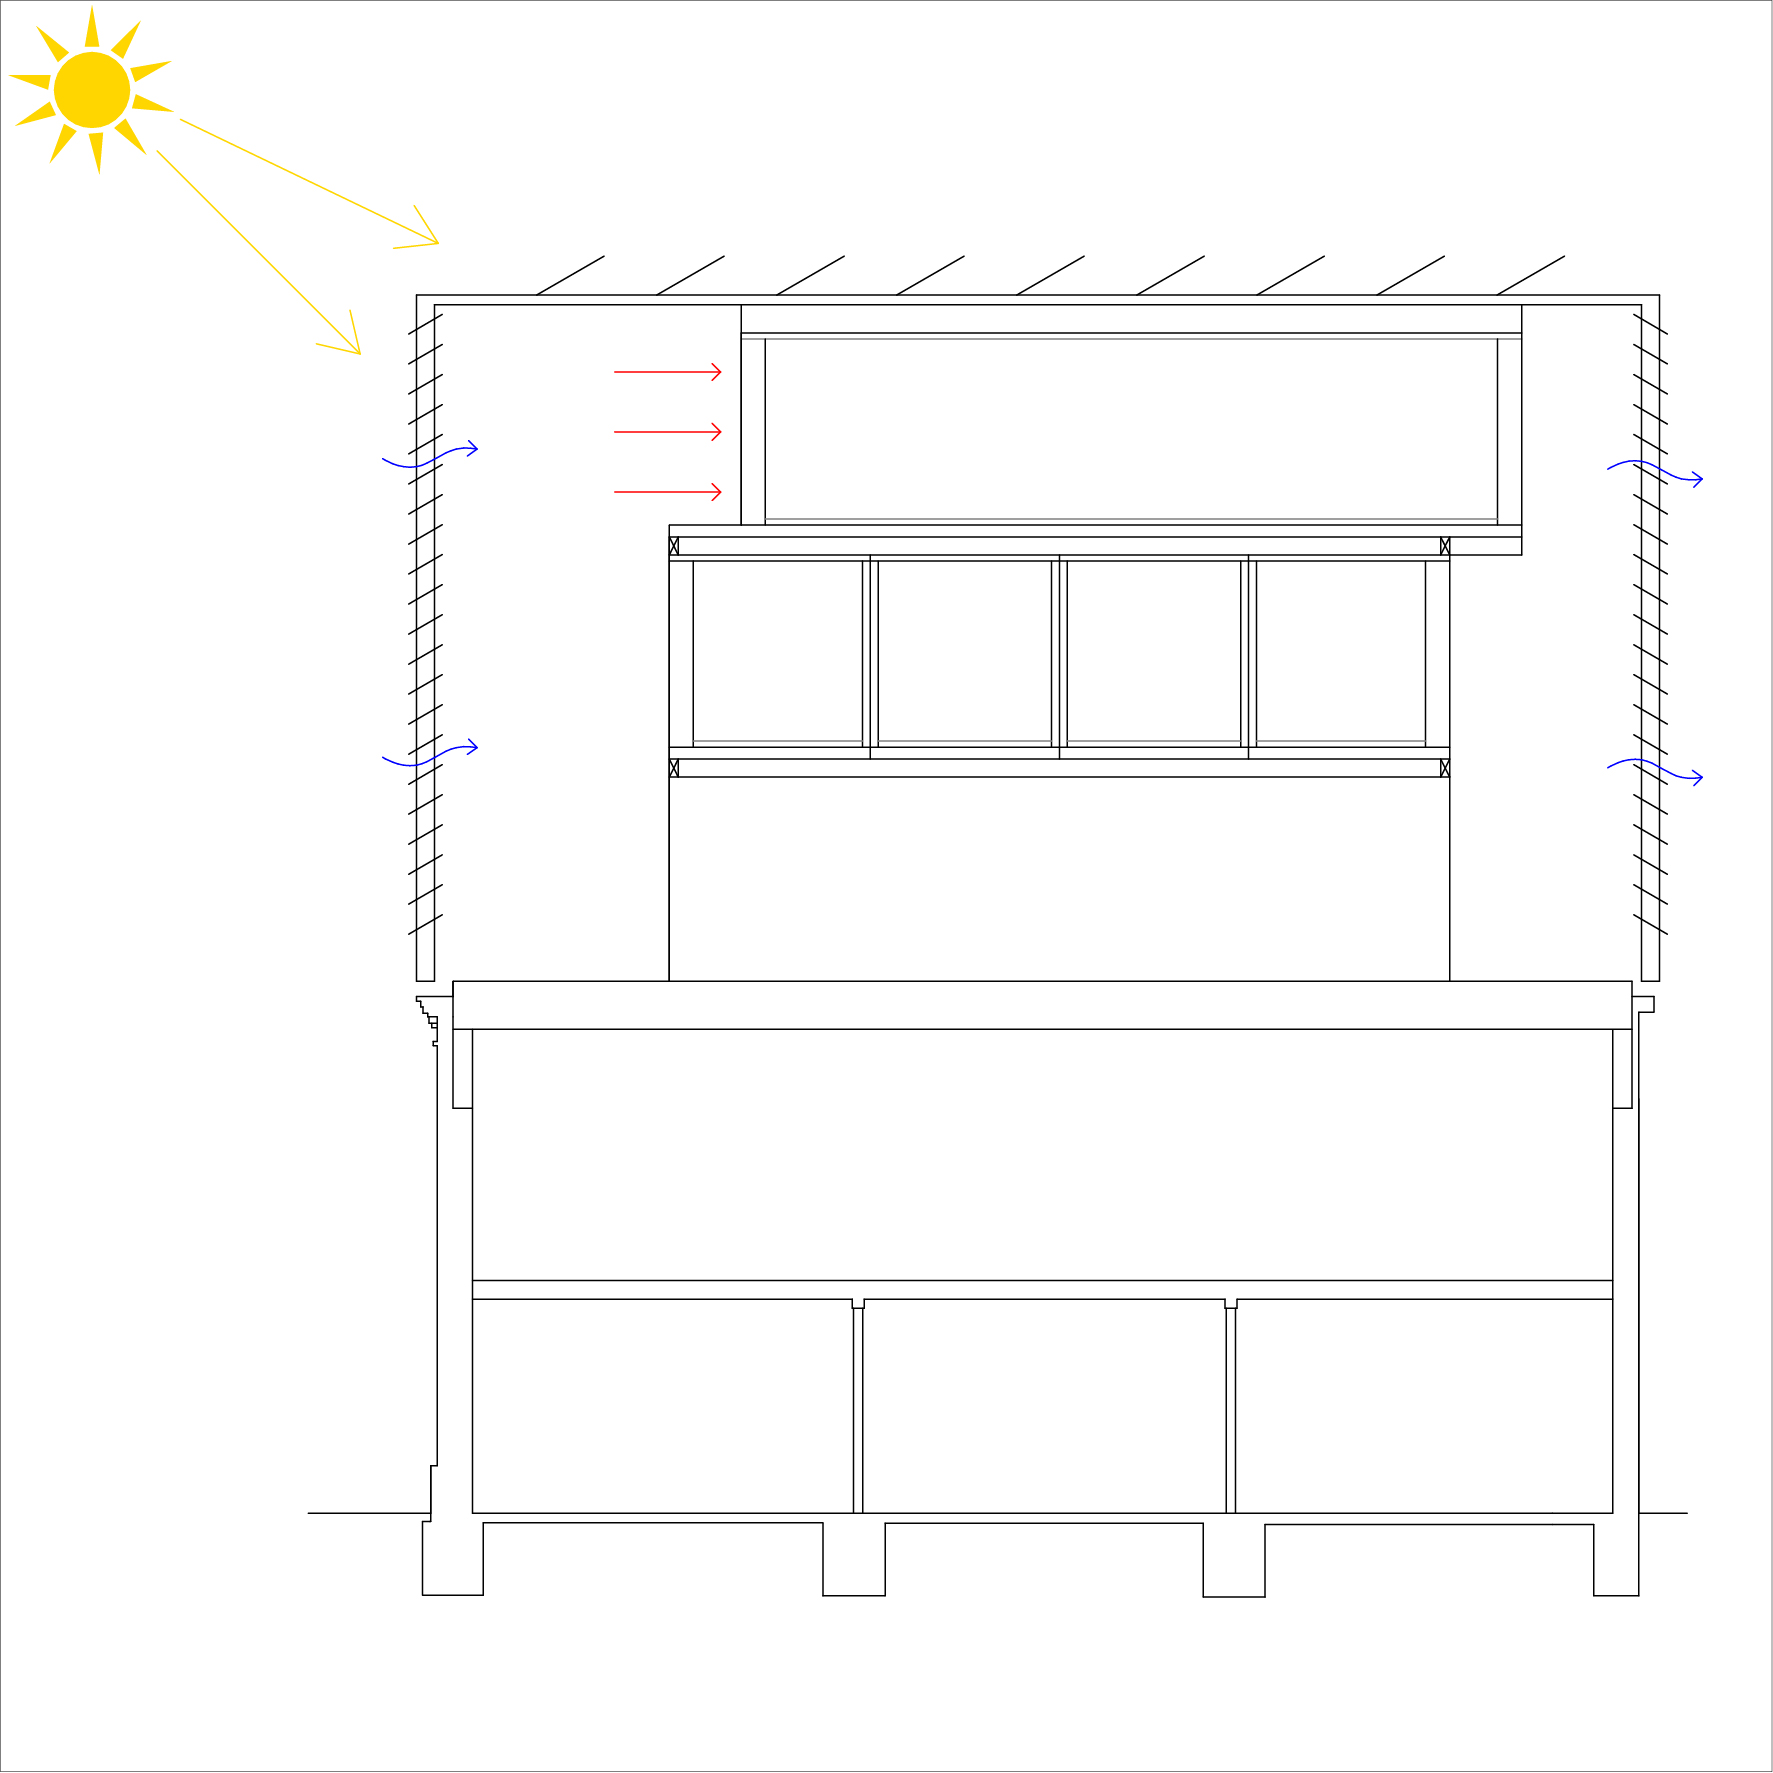 pictogram photovoltaic system 